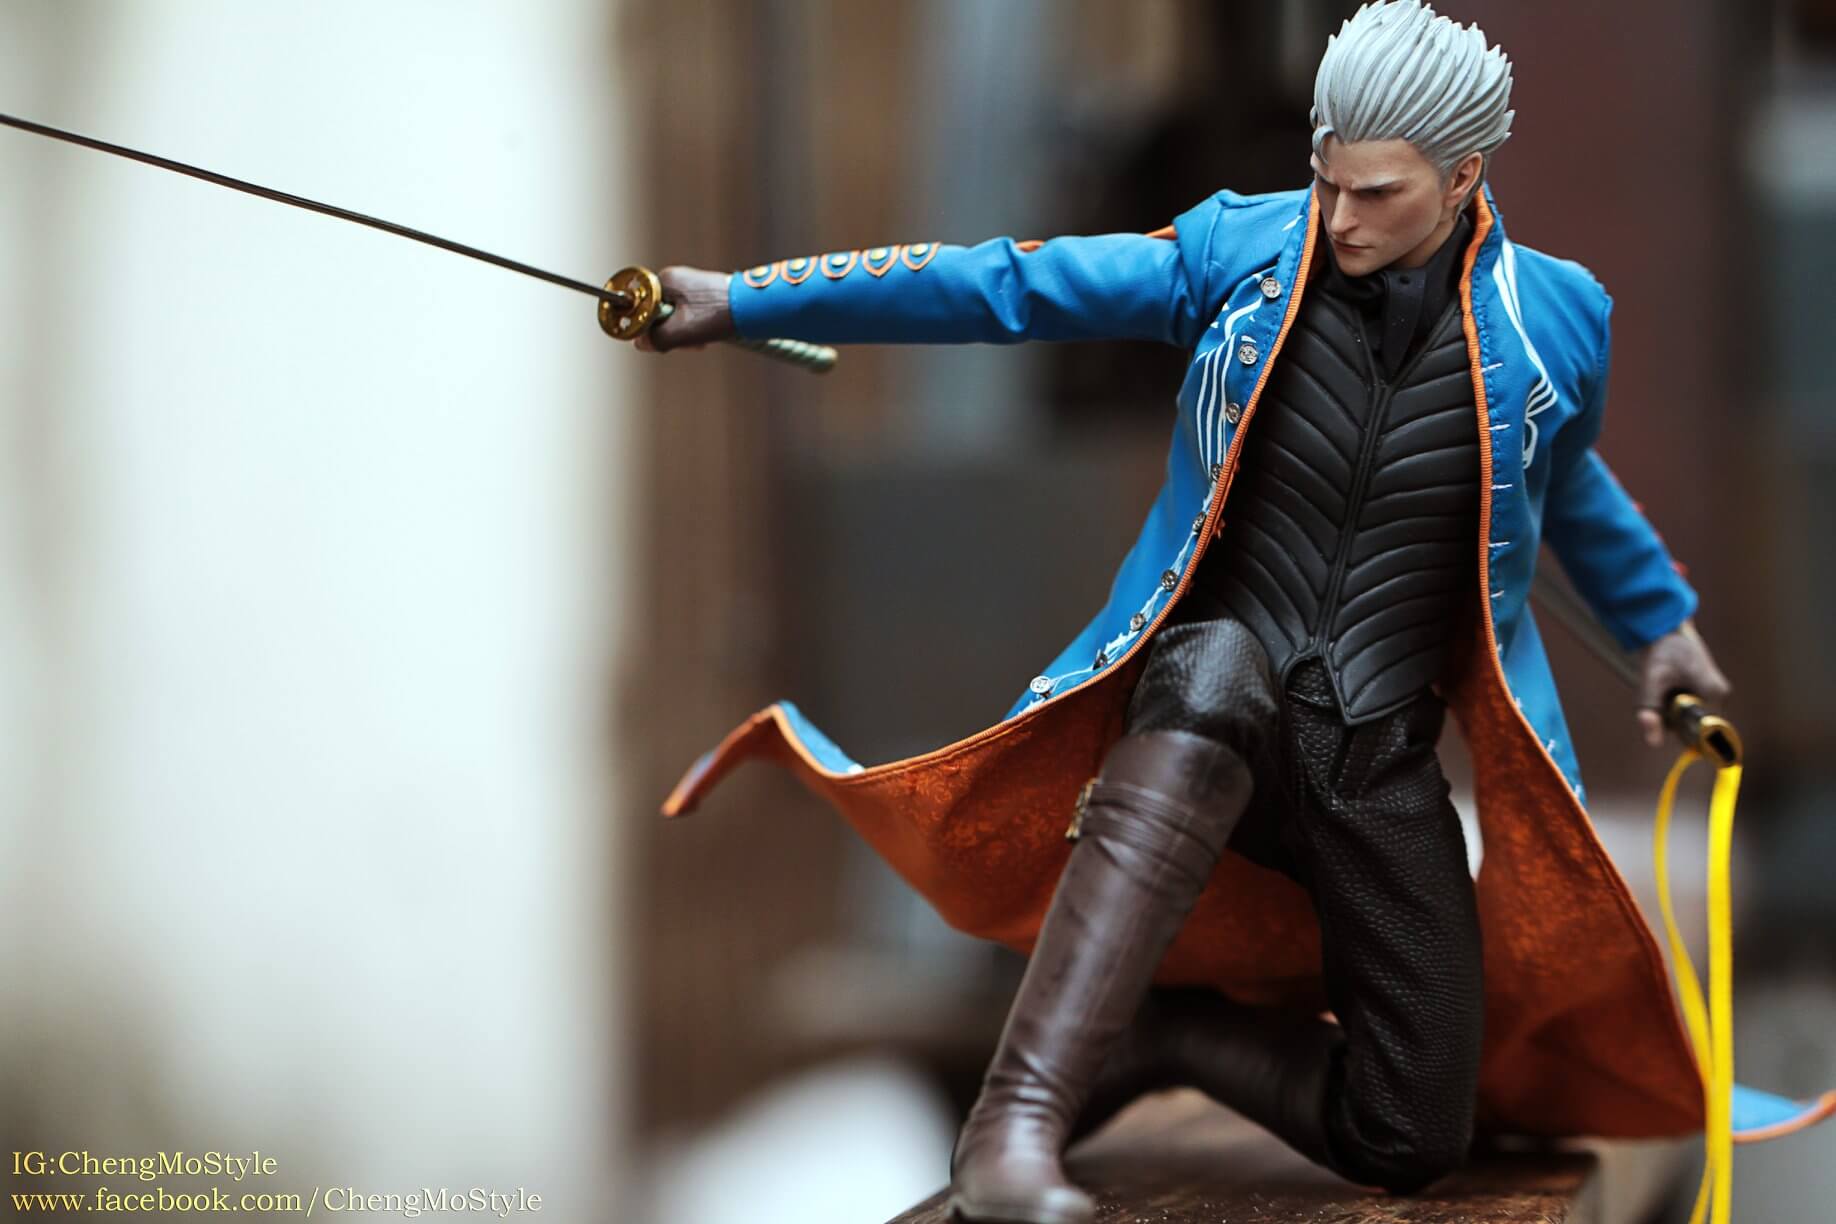 「ChengMoStyle」Devil May Cry 3 Vergil | Figround